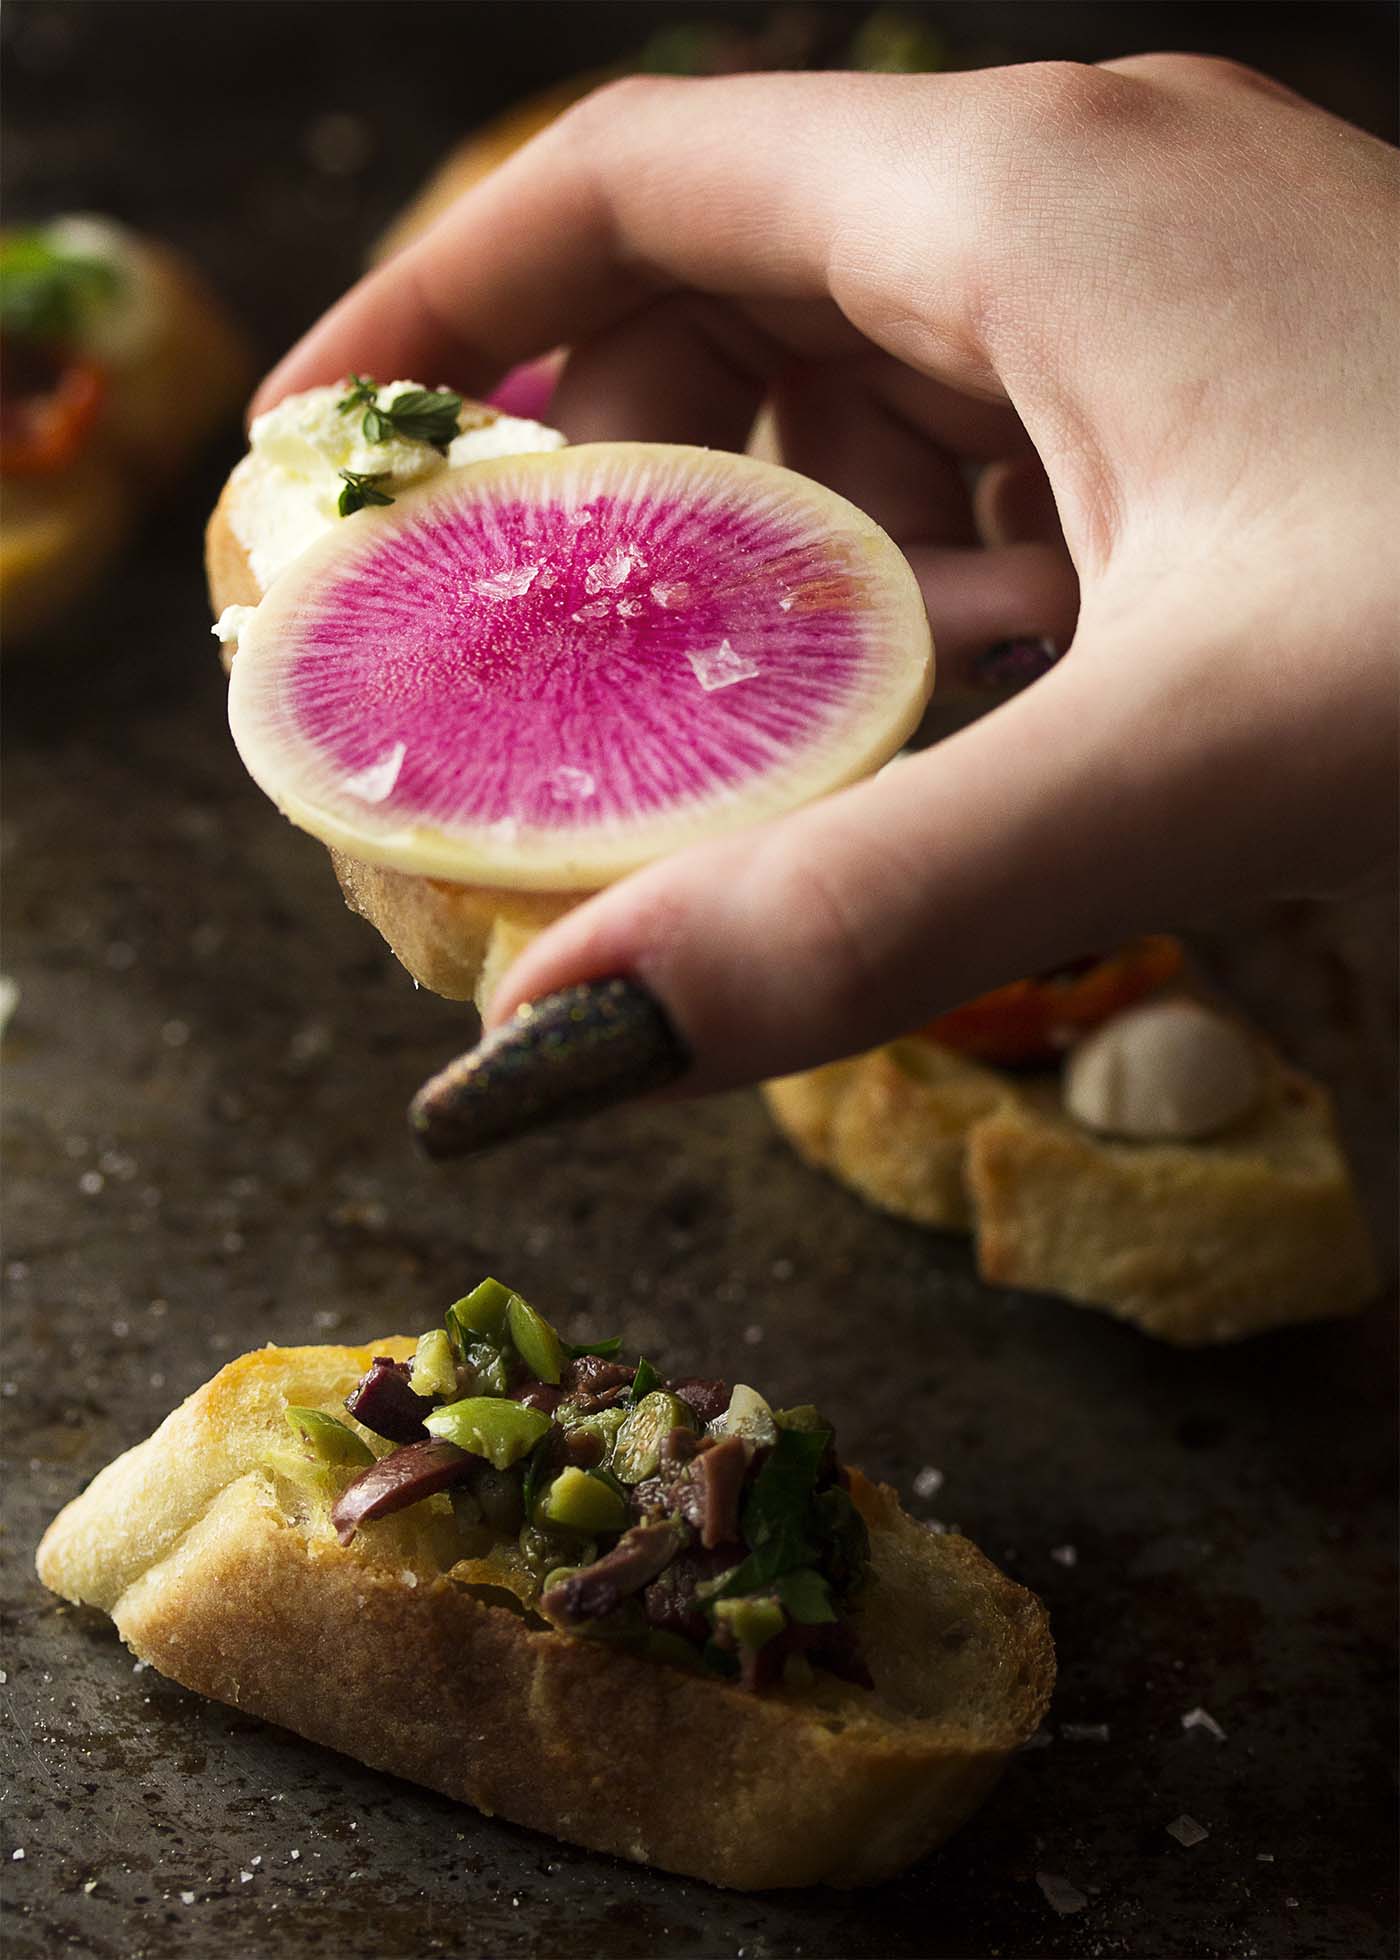 A hand holding up a crostini with goat cheese spread and a watermelon radish slice.